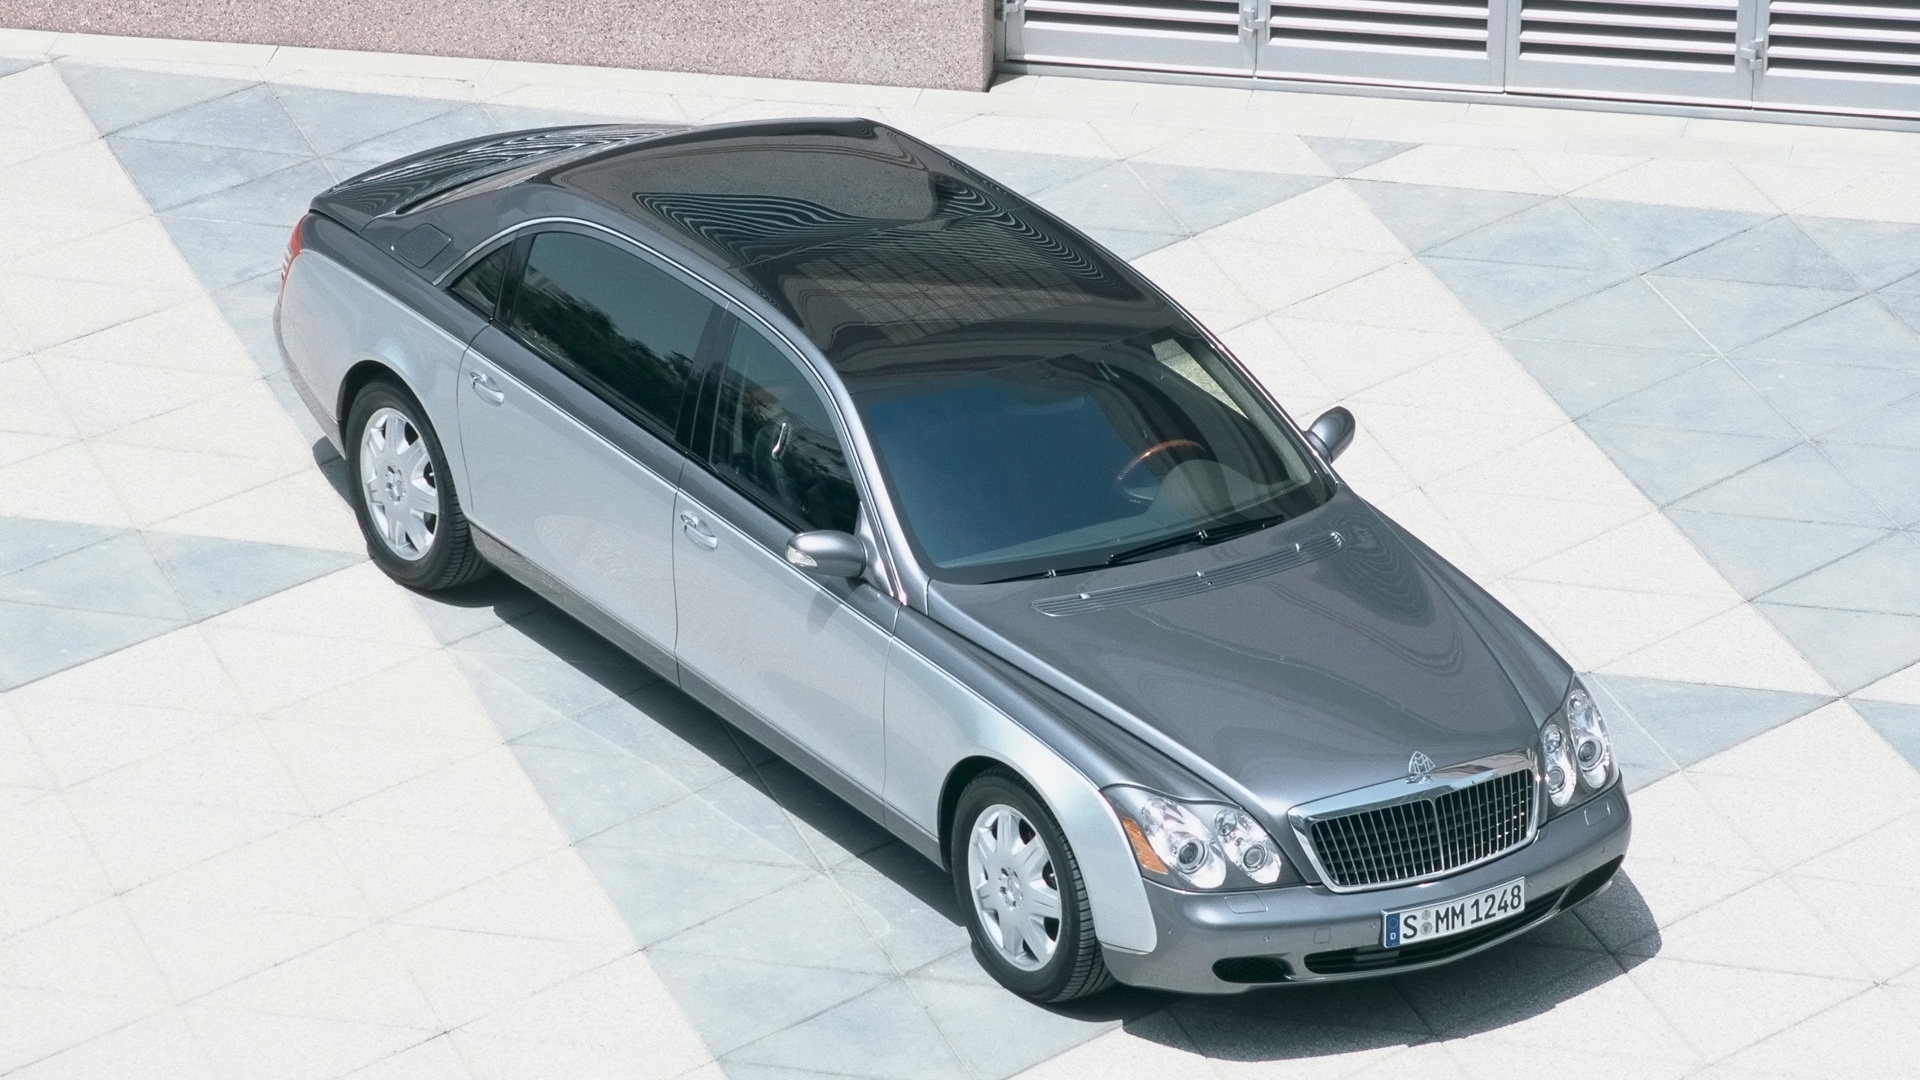 Maybach 62 Outside Right Front for 1920 x 1080 HDTV 1080p resolution